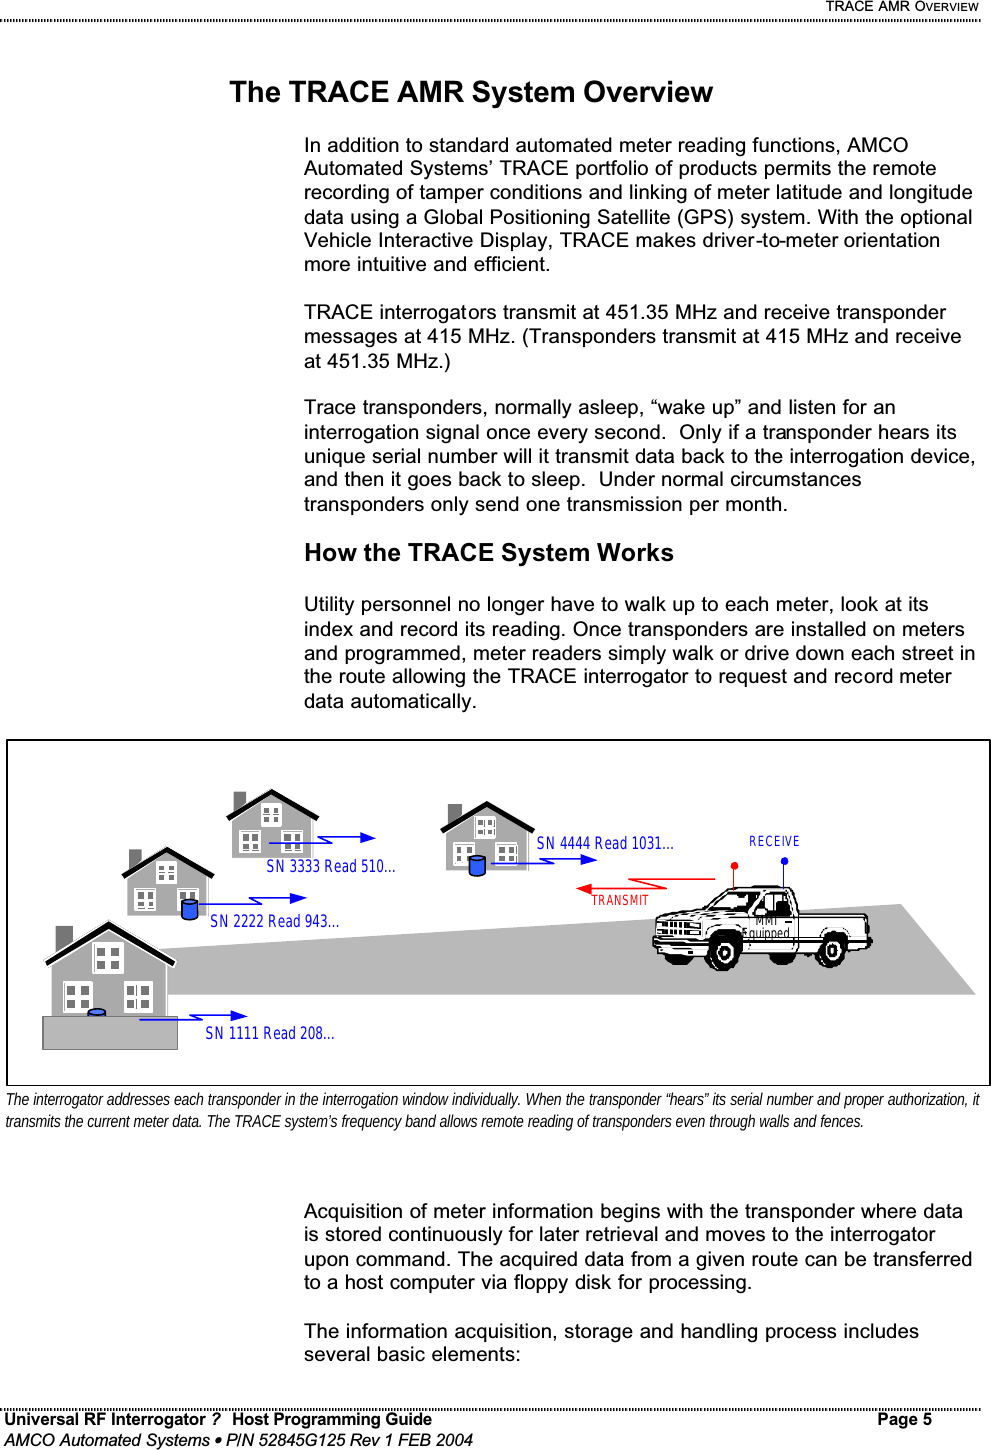     TRACE AMR OVERVIEW Universal RF Interrogator ?  Host Programming Guide Page 5  AMCO Automated Systems • P/N 52845G125 Rev 1 FEB 2004   The TRACE AMR System Overview  In addition to standard automated meter reading functions, AMCO Automated Systems’ TRACE portfolio of products permits the remote recording of tamper conditions and linking of meter latitude and longitude data using a Global Positioning Satellite (GPS) system. With the optional Vehicle Interactive Display, TRACE makes driver-to-meter orientation more intuitive and efficient.   TRACE interrogators transmit at 451.35 MHz and receive transponder messages at 415 MHz. (Transponders transmit at 415 MHz and receive at 451.35 MHz.)    Trace transponders, normally asleep, “wake up” and listen for an interrogation signal once every second.  Only if a transponder hears its unique serial number will it transmit data back to the interrogation device, and then it goes back to sleep.  Under normal circumstances transponders only send one transmission per month.    How the TRACE System Works  Utility personnel no longer have to walk up to each meter, look at its index and record its reading. Once transponders are installed on meters and programmed, meter readers simply walk or drive down each street in the route allowing the TRACE interrogator to request and record meter data automatically.  Acquisition of meter information begins with the transponder where data is stored continuously for later retrieval and moves to the interrogator upon command. The acquired data from a given route can be transferred to a host computer via floppy disk for processing.  The information acquisition, storage and handling process includes several basic elements:  SN 1111 Read 208… SN 2222 Read 943… MMI Equipped SN 3333 Read 510… SN 4444 Read 1031… TRANSMIT RECEIVE The interrogator addresses each transponder in the interrogation window individually. When the transponder “hears” its serial number and proper authorization, it transmits the current meter data. The TRACE system’s frequency band allows remote reading of transponders even through walls and fences.  